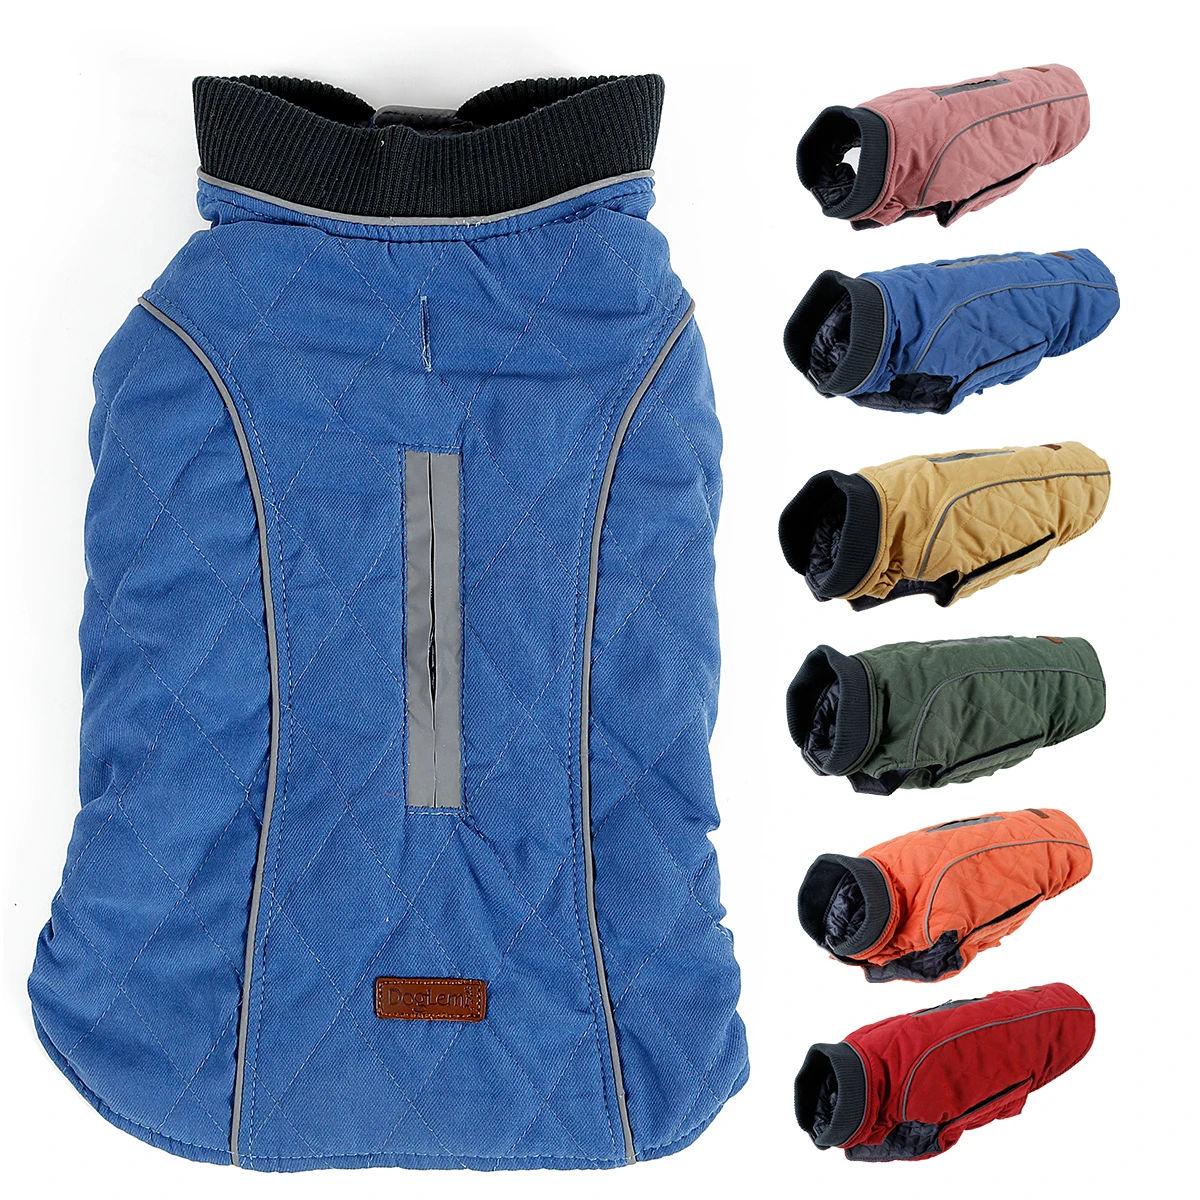 

Hot Sale Winter Dog Jacket Vest , Quilted Warm Clothing Coat for Small Large Dogs,OEM ODM Wholesale Top Quality Pet Clothes